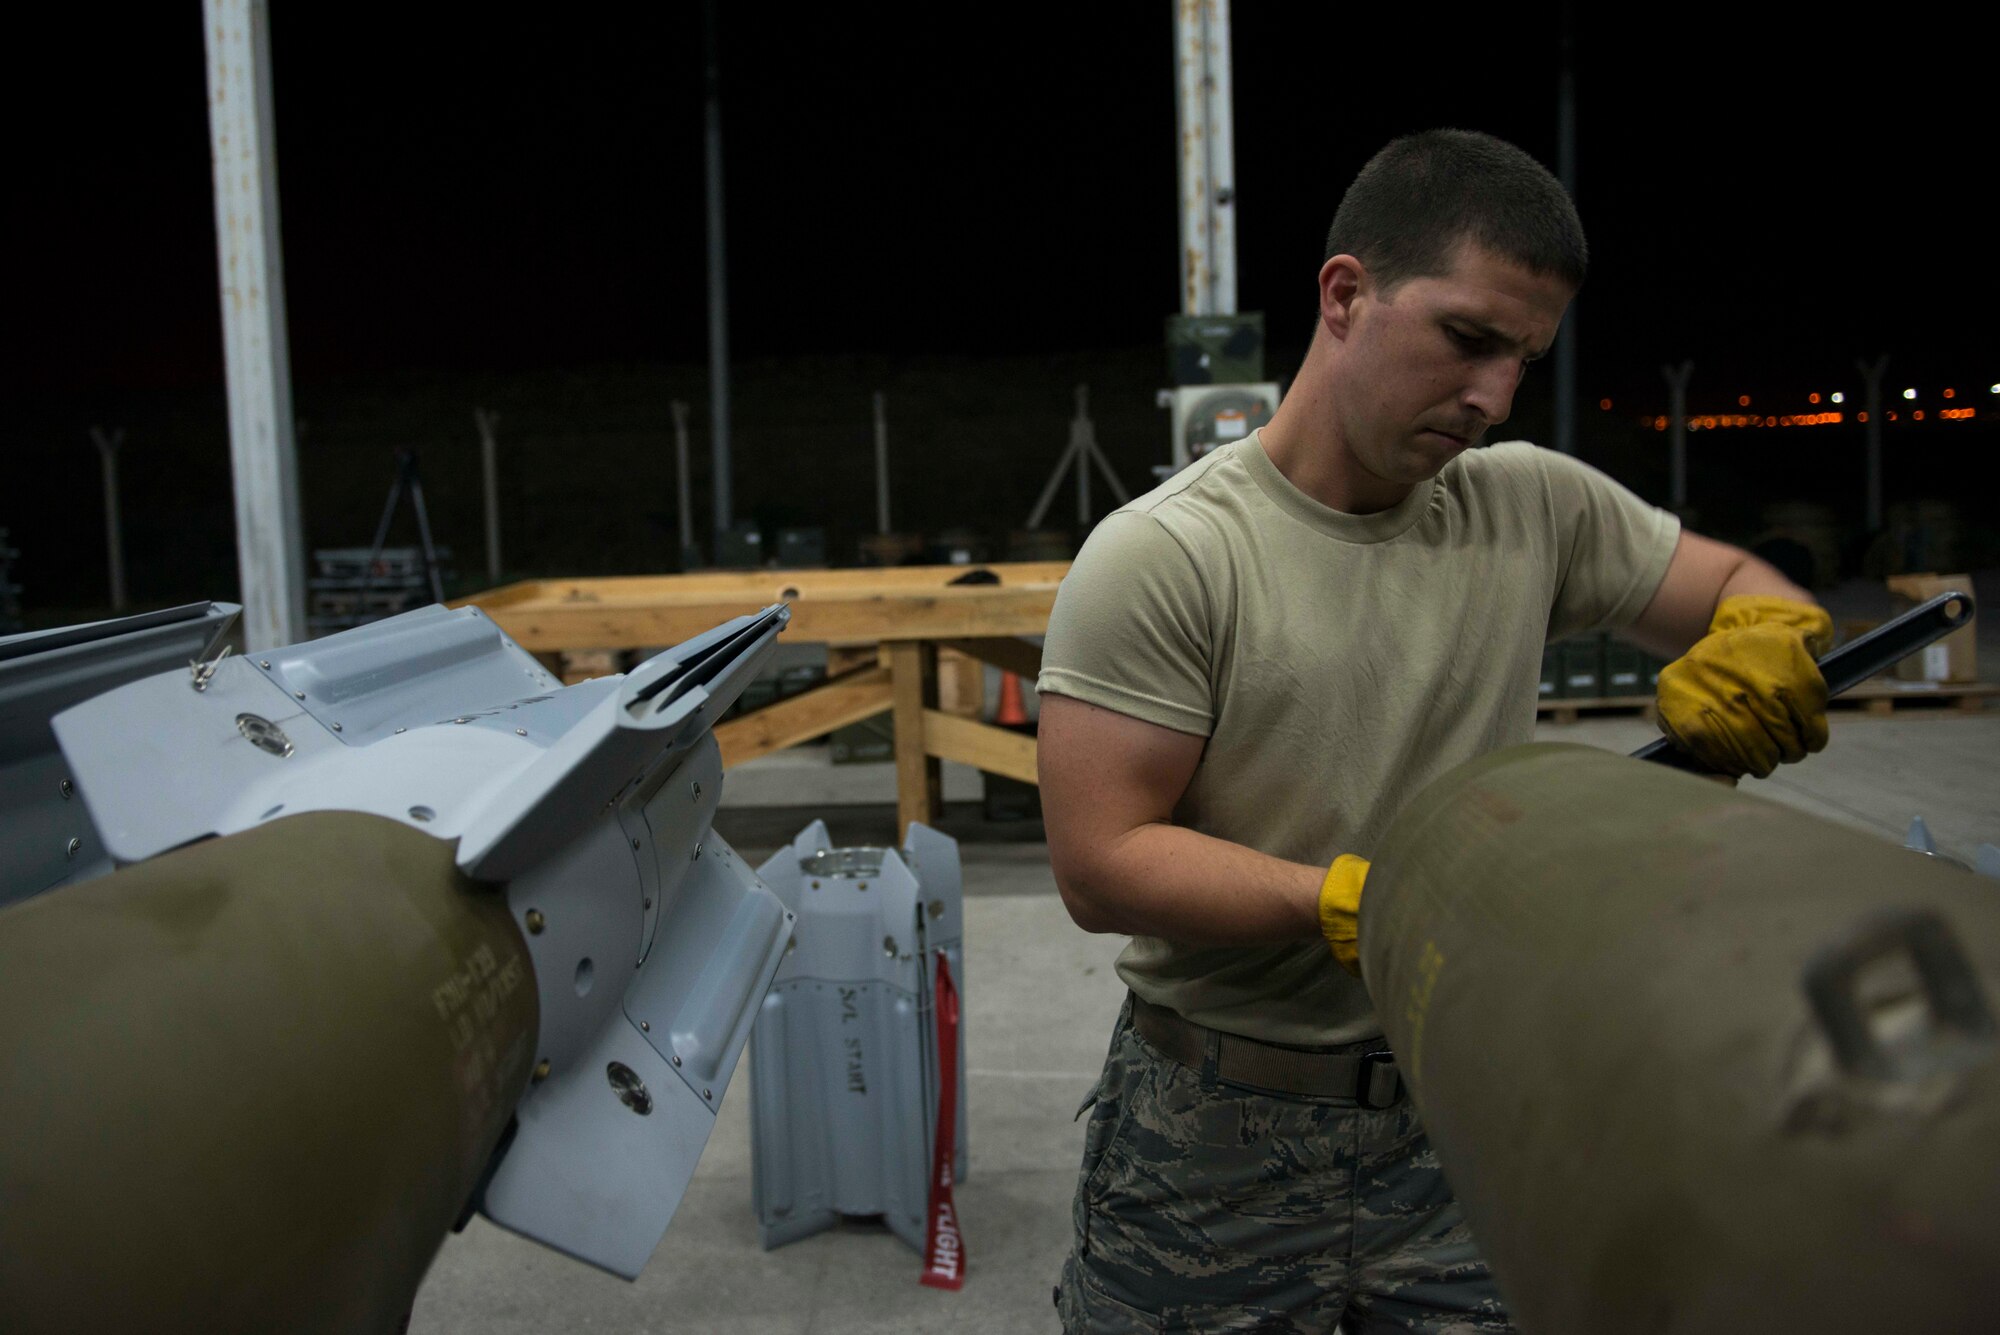 U.S. Air Force Staff Sgt. Curtis Downer, 447th Expeditionary Aircraft Maintenance Squadron munitions systems specialist, cleans thread wells on a GBU-12 Paveway II laser-guided bomb Aug. 8, 2016, at Incirlik Air Base, Turkey. Thread wells are cleaned prior to installing the fin to ensure a safe and secure attachment. (U.S. Air Force photo by Senior Airman John Nieves Camacho)